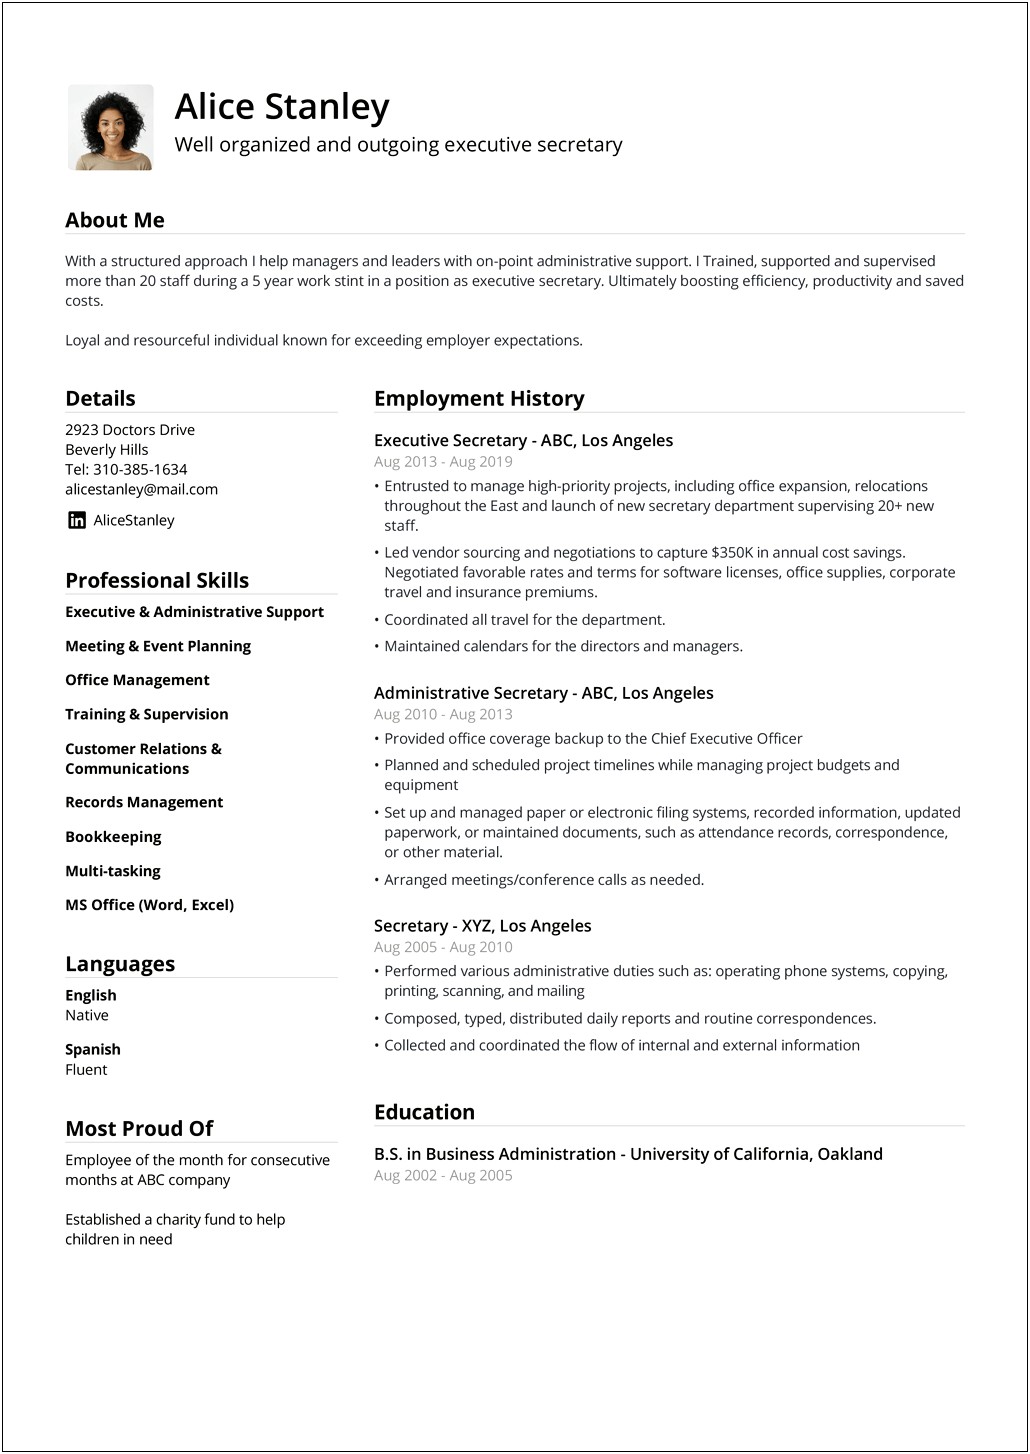 Resume Different Company With Same Job